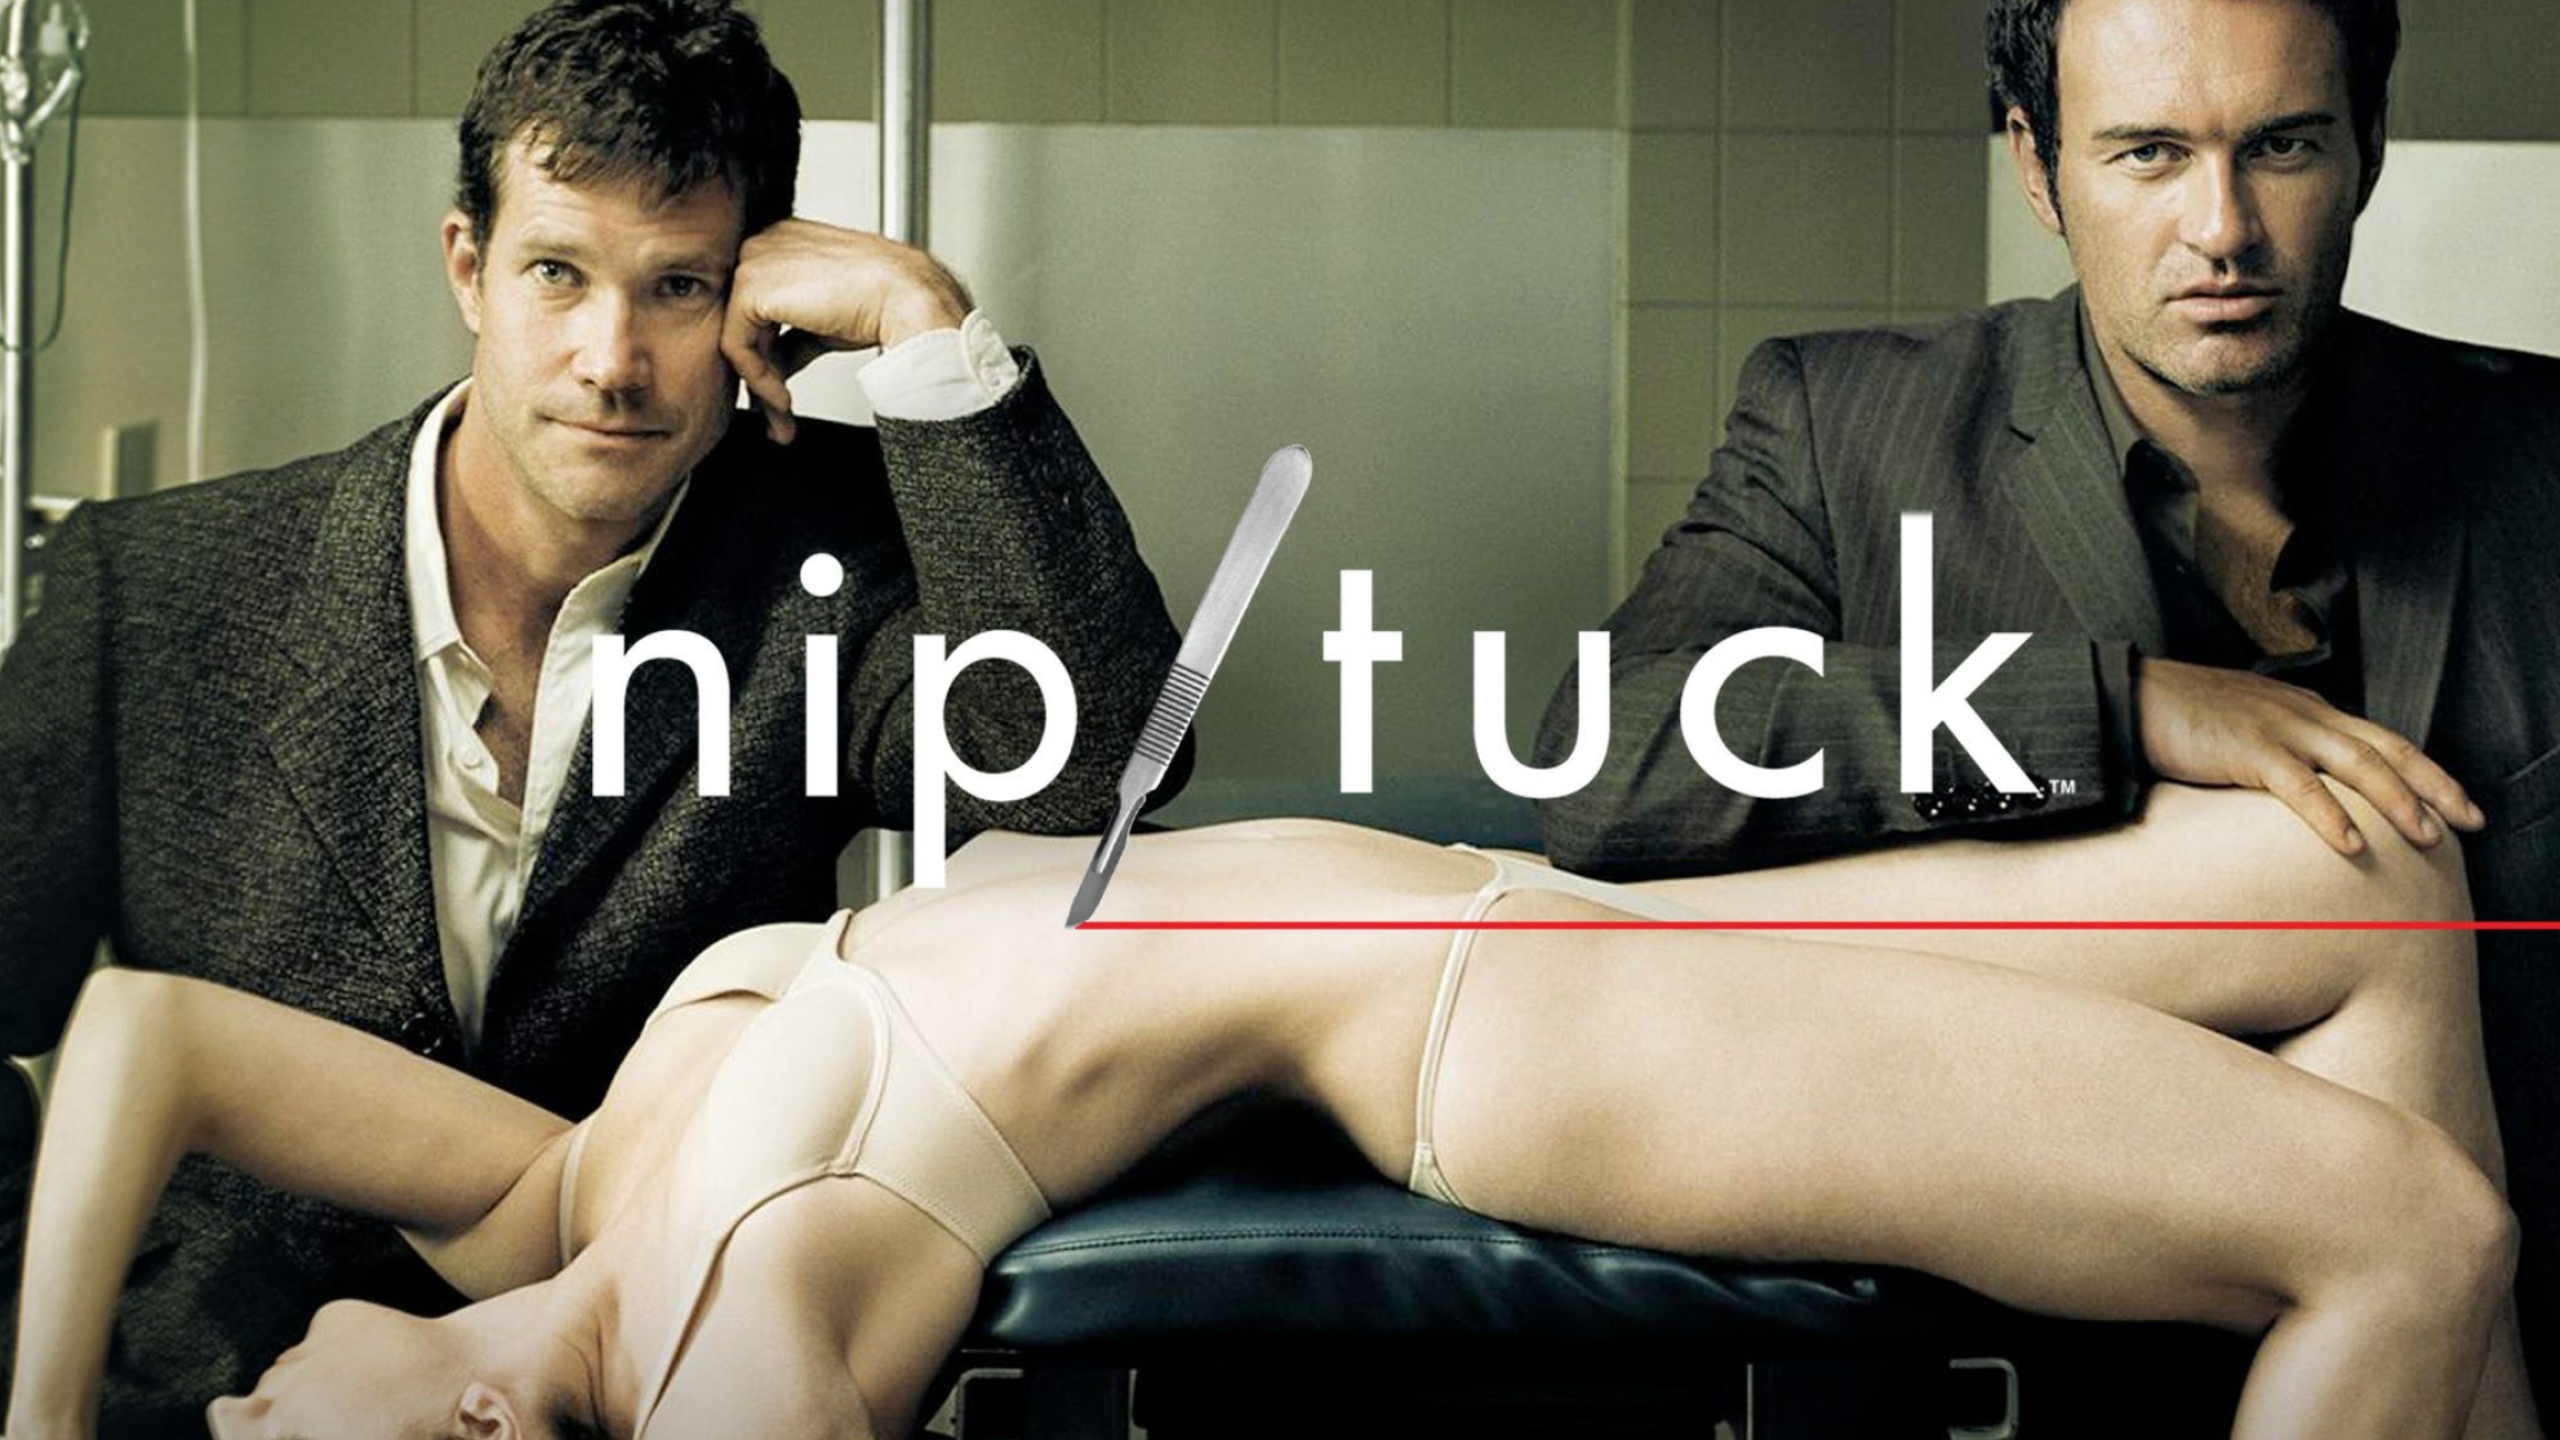 Nip/Tuck (TV Series): The show premiered on July 22, 2003, 100 episodes. 2560x1440 HD Wallpaper.